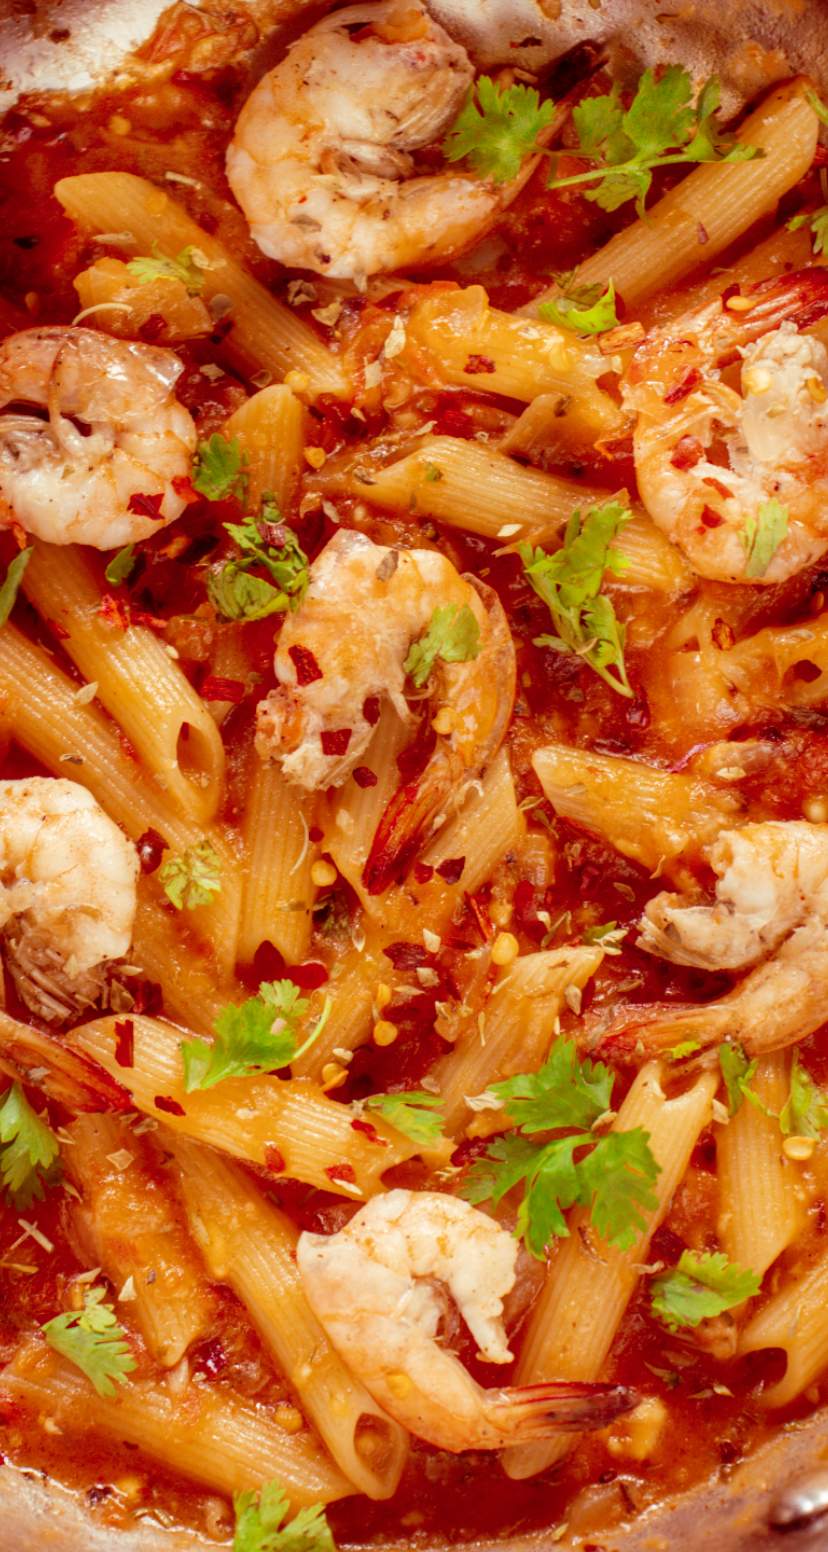 Tomato Garlic Butter Shrimp with penne